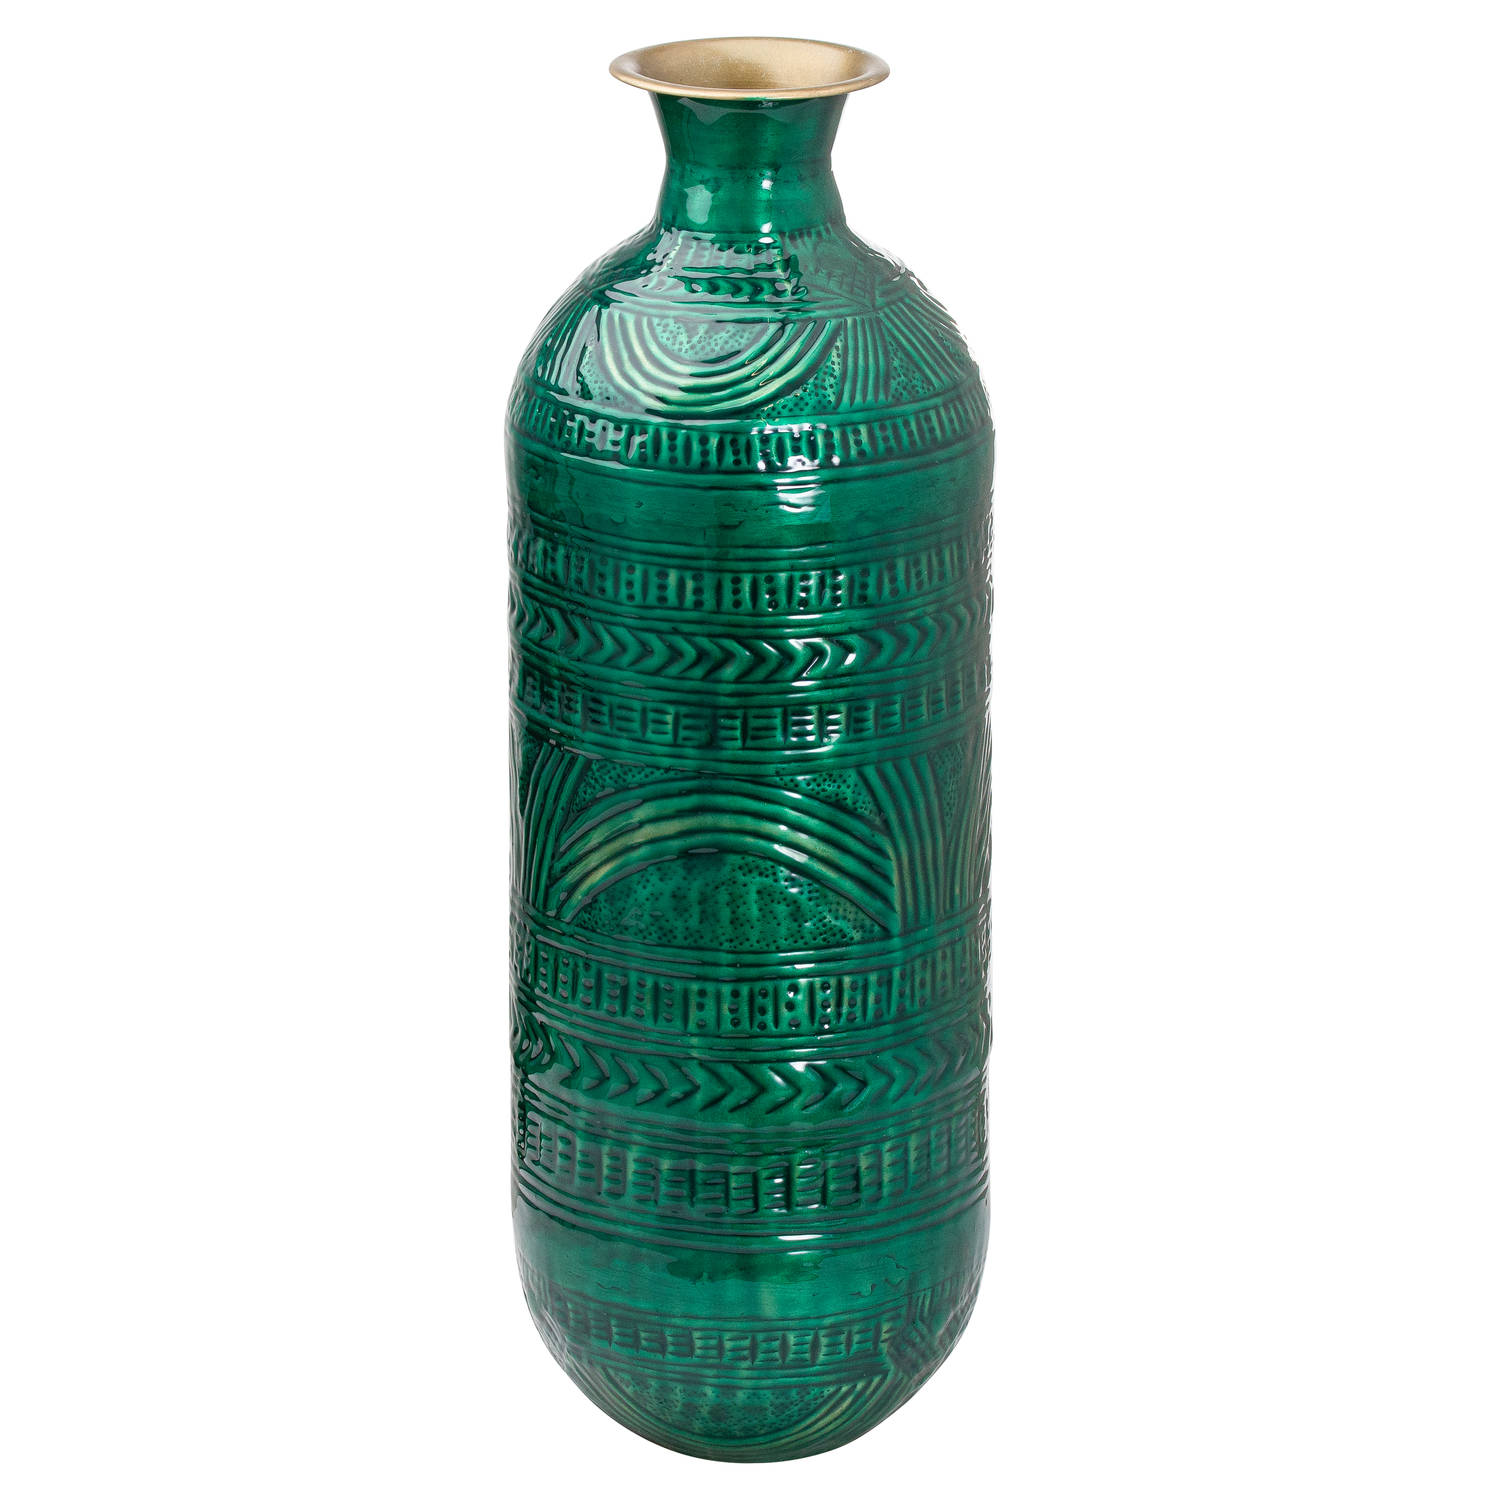 Aztec Collection Brass Embossed Ceramic Dipped Lebes Vase - Image 1